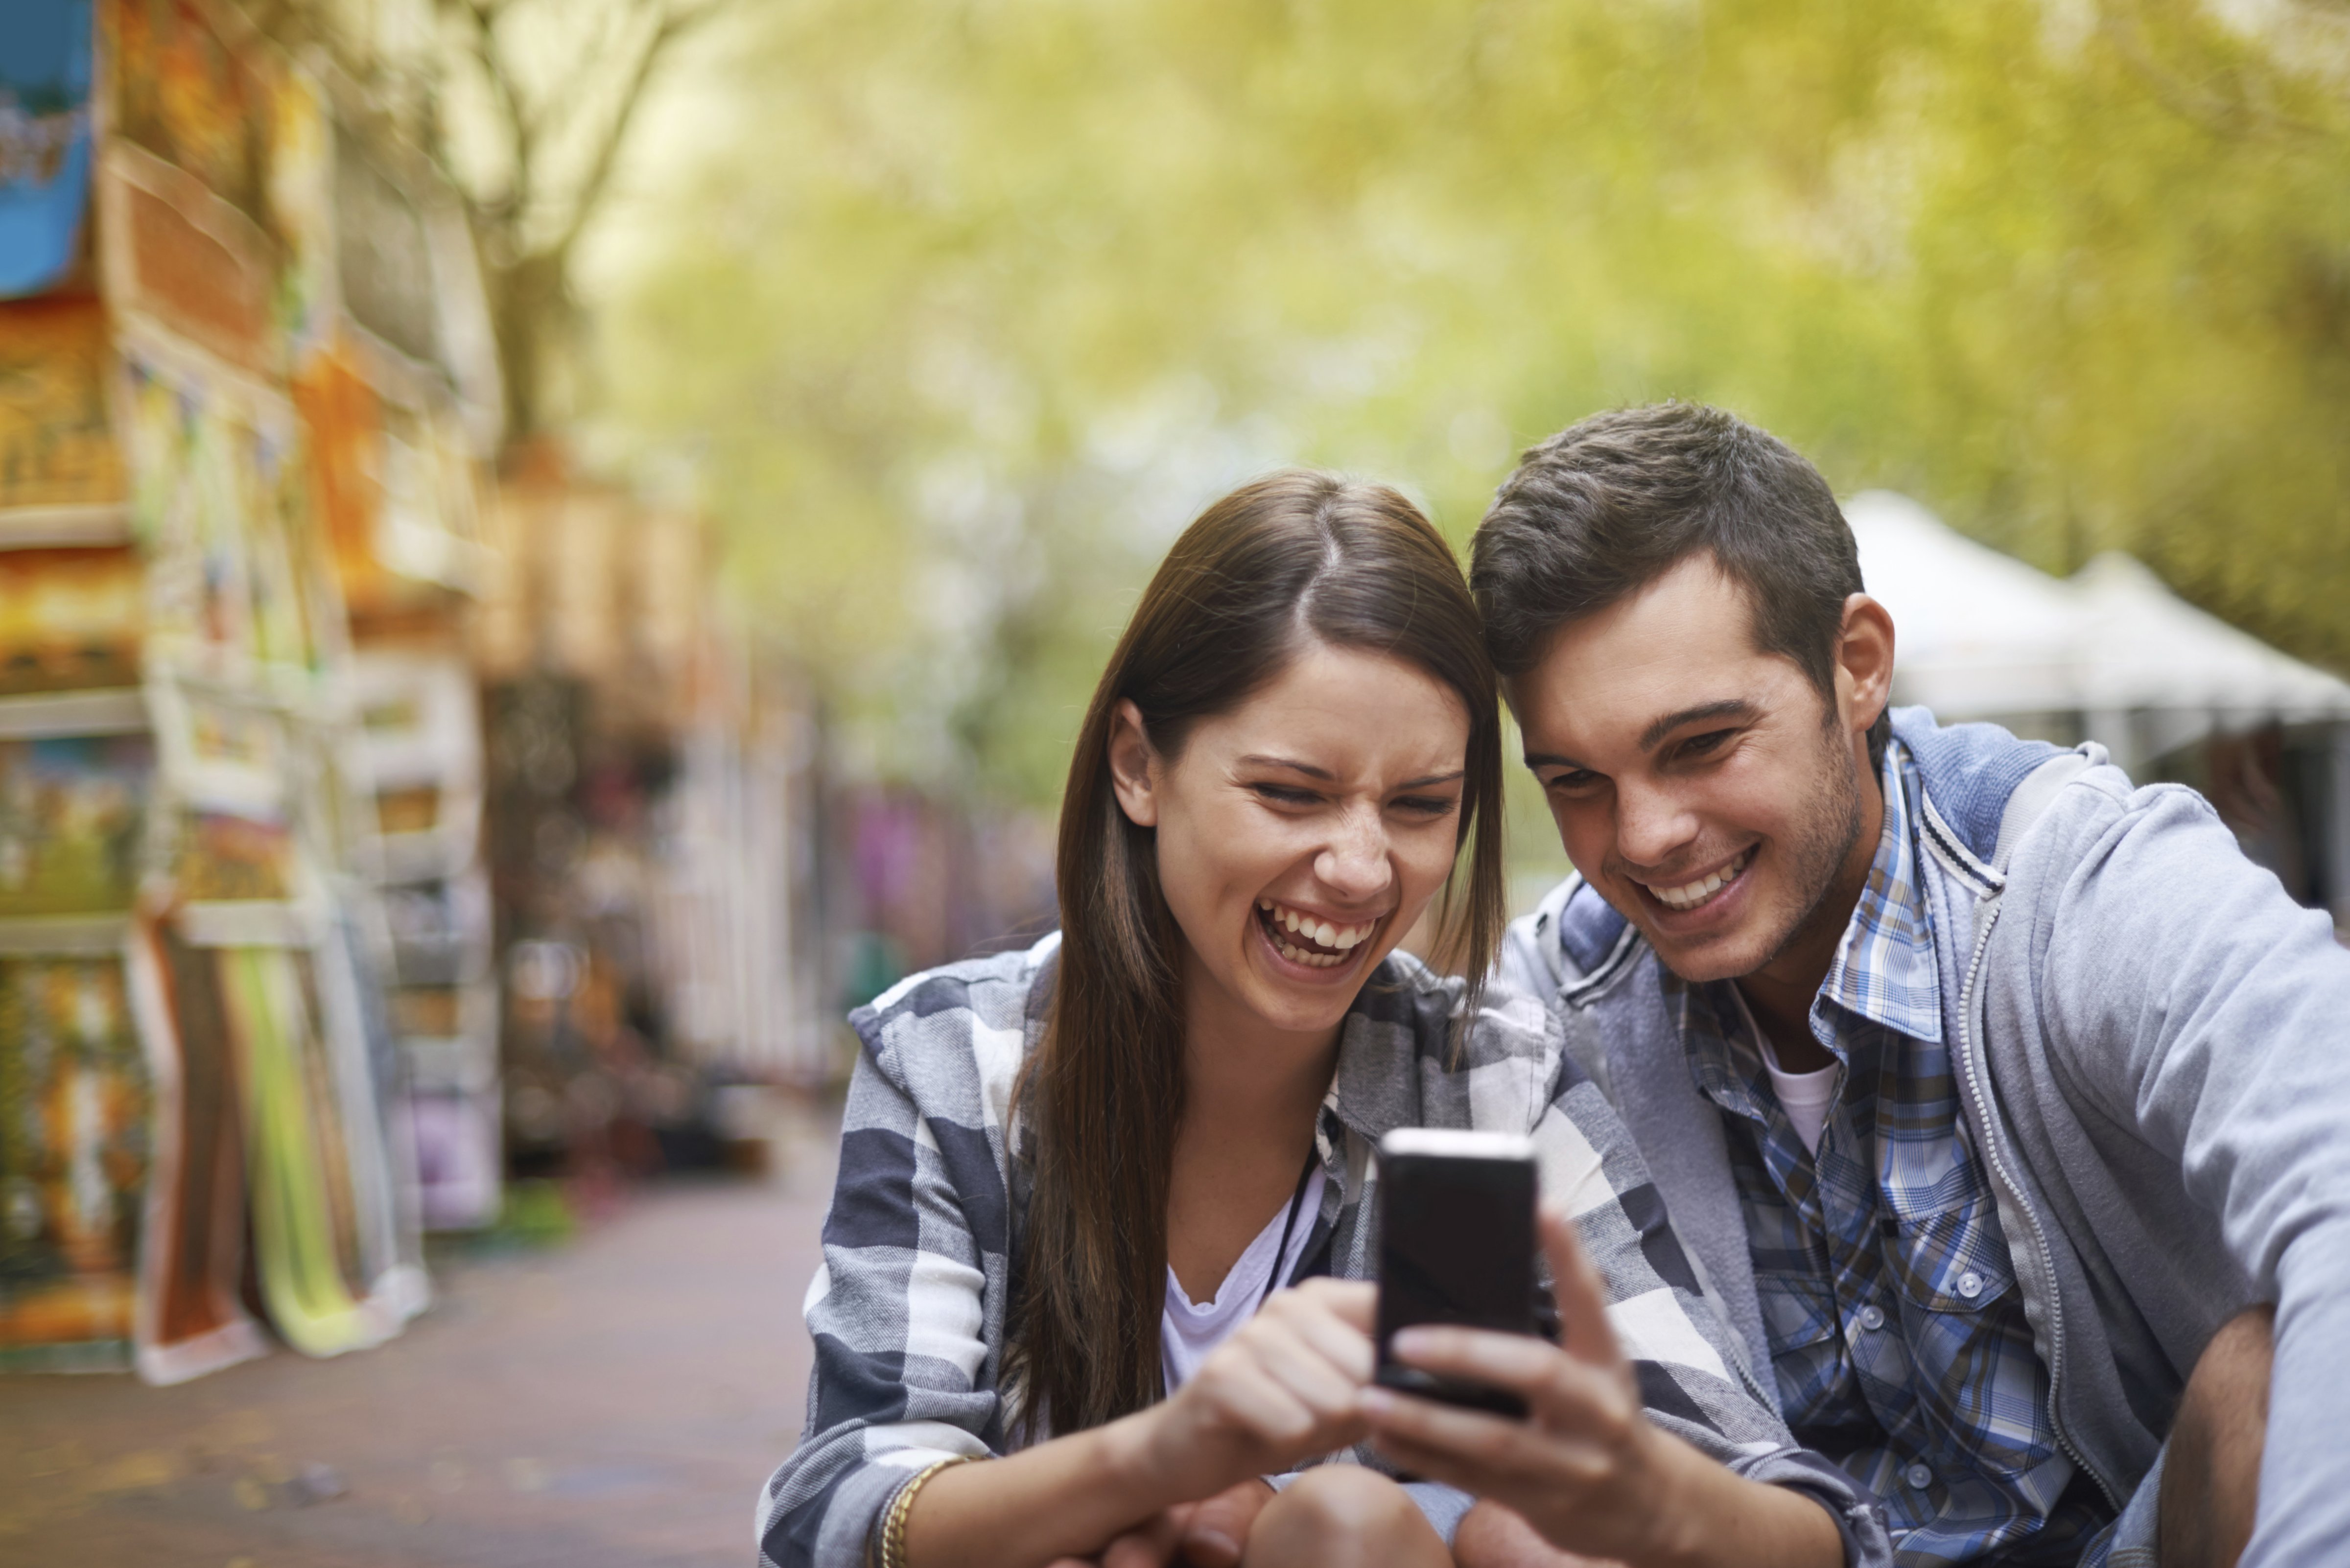 A young man and young woman share a laugh over a smartphone. (PeopleImages.com&mdash;Getty Images)